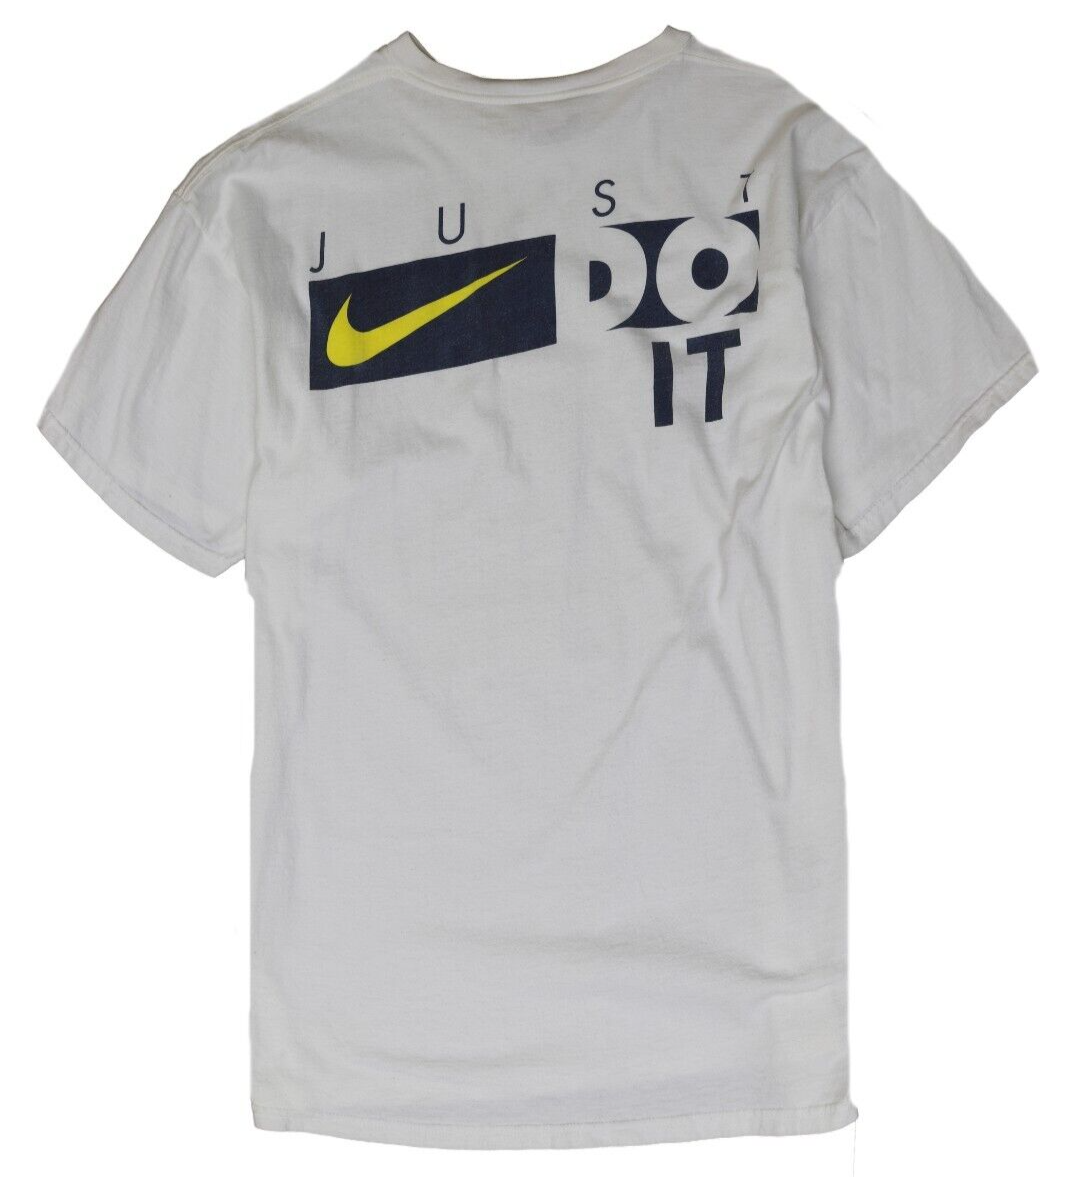 Vintage Nike Just Do It T-Shirt Size Large 90s